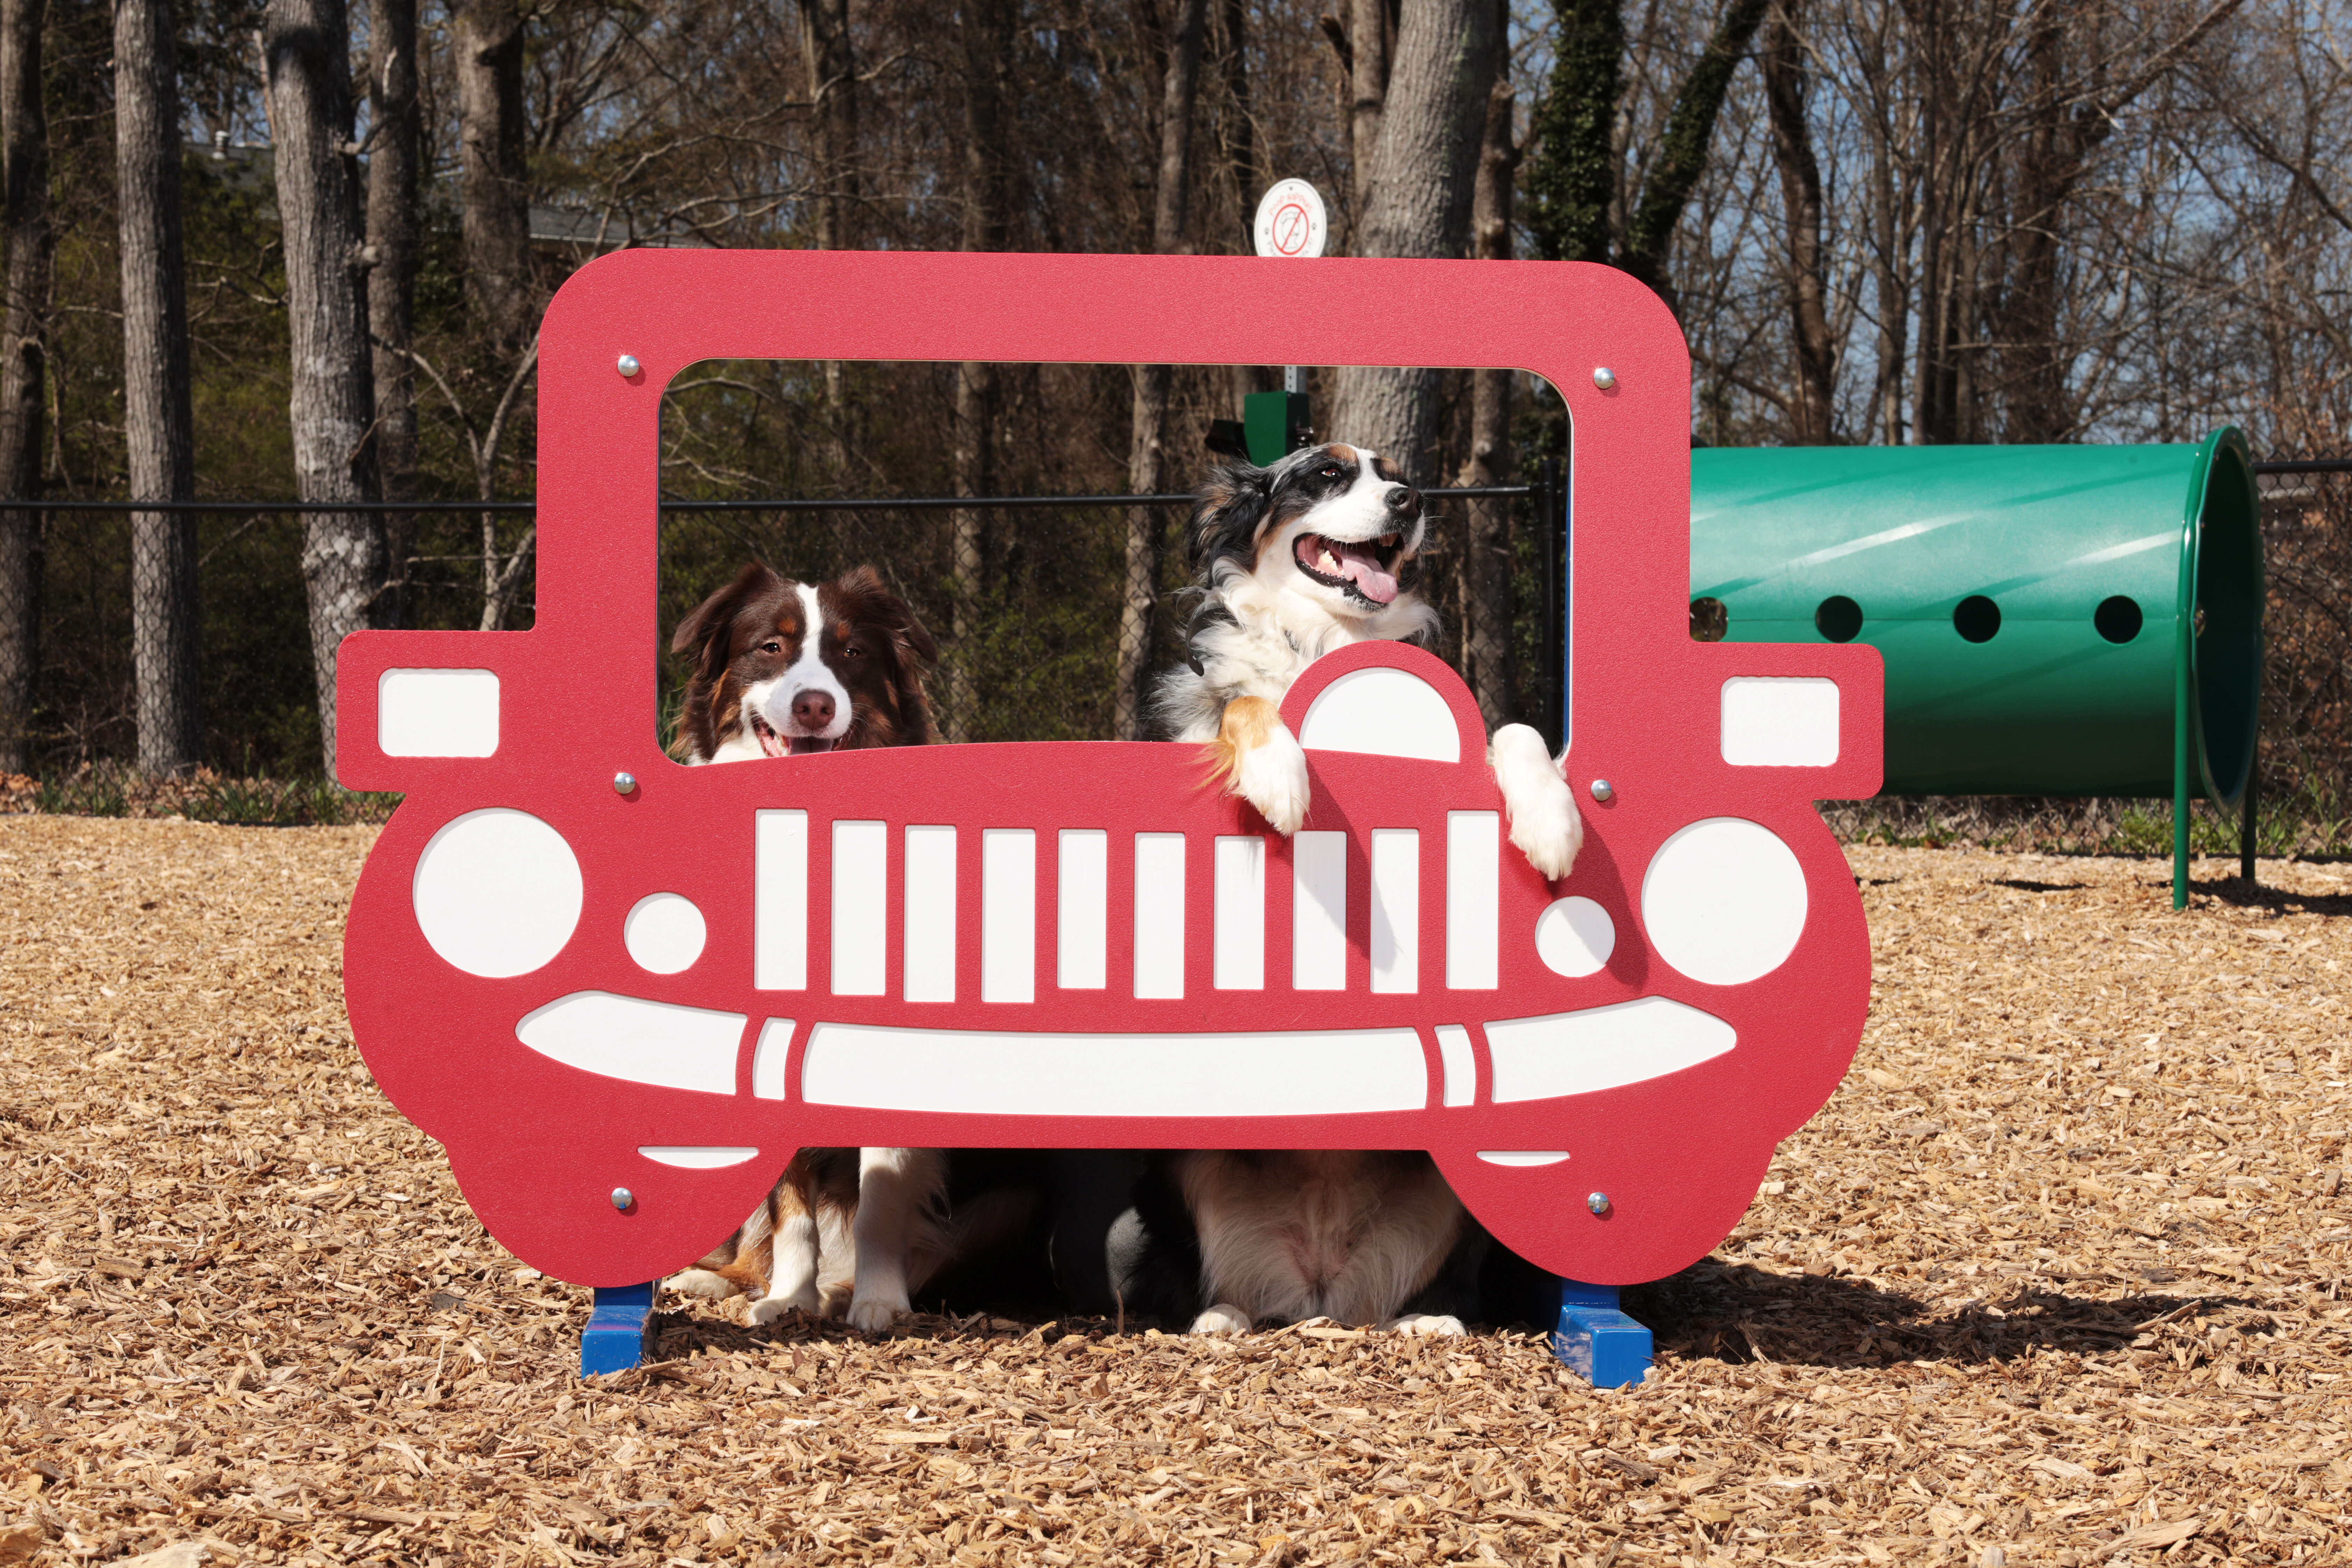 Puppy Paradise Recycled Plastic Dog Park Play Equipment